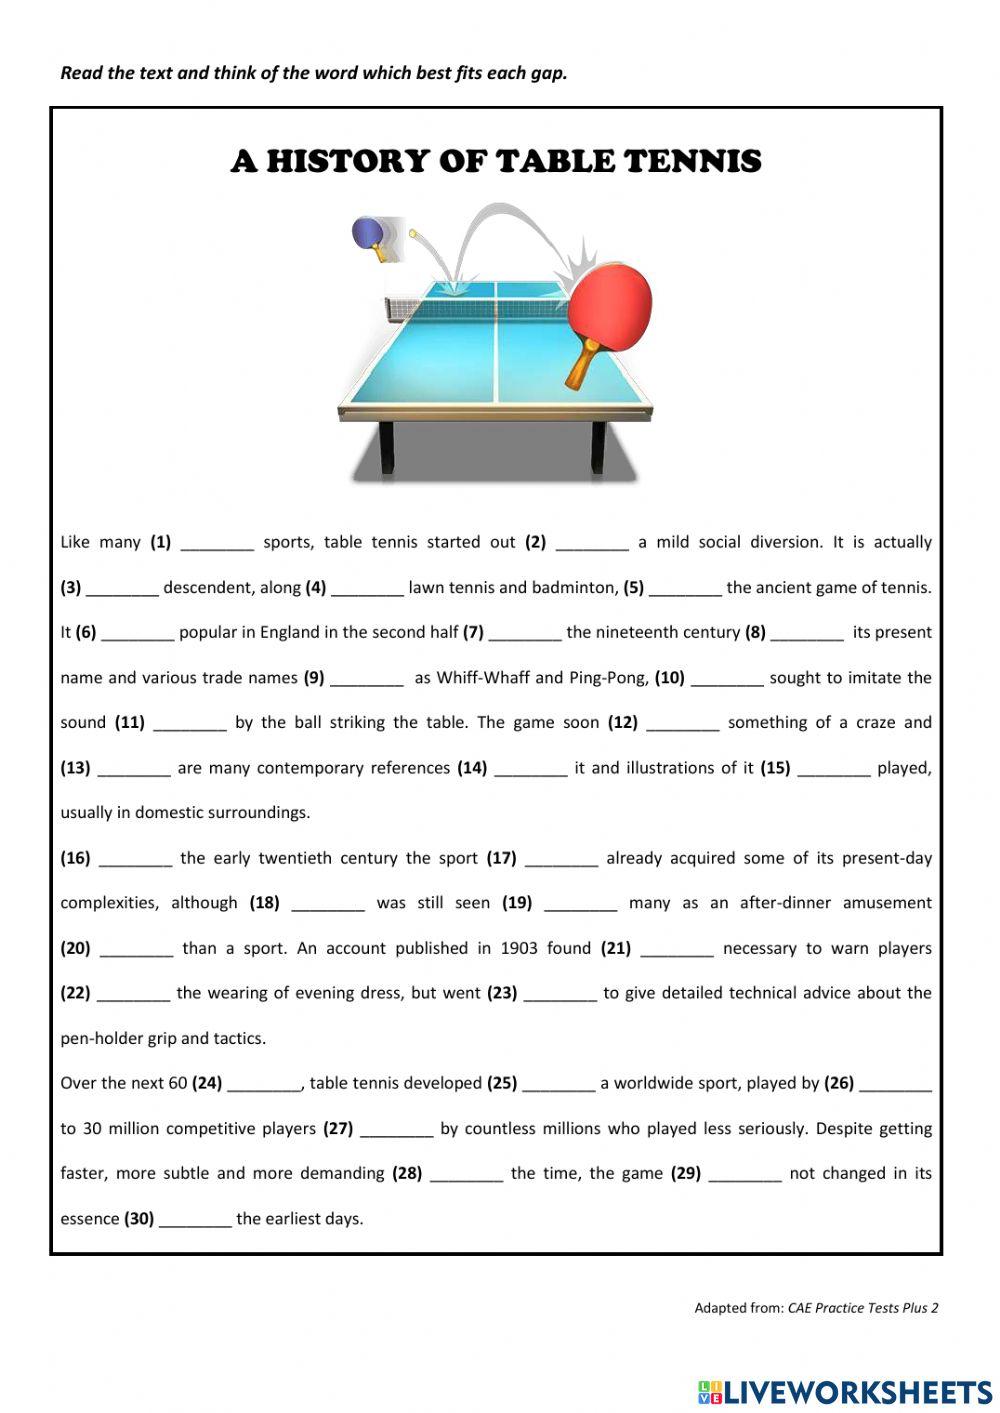 A History of Table Tennis